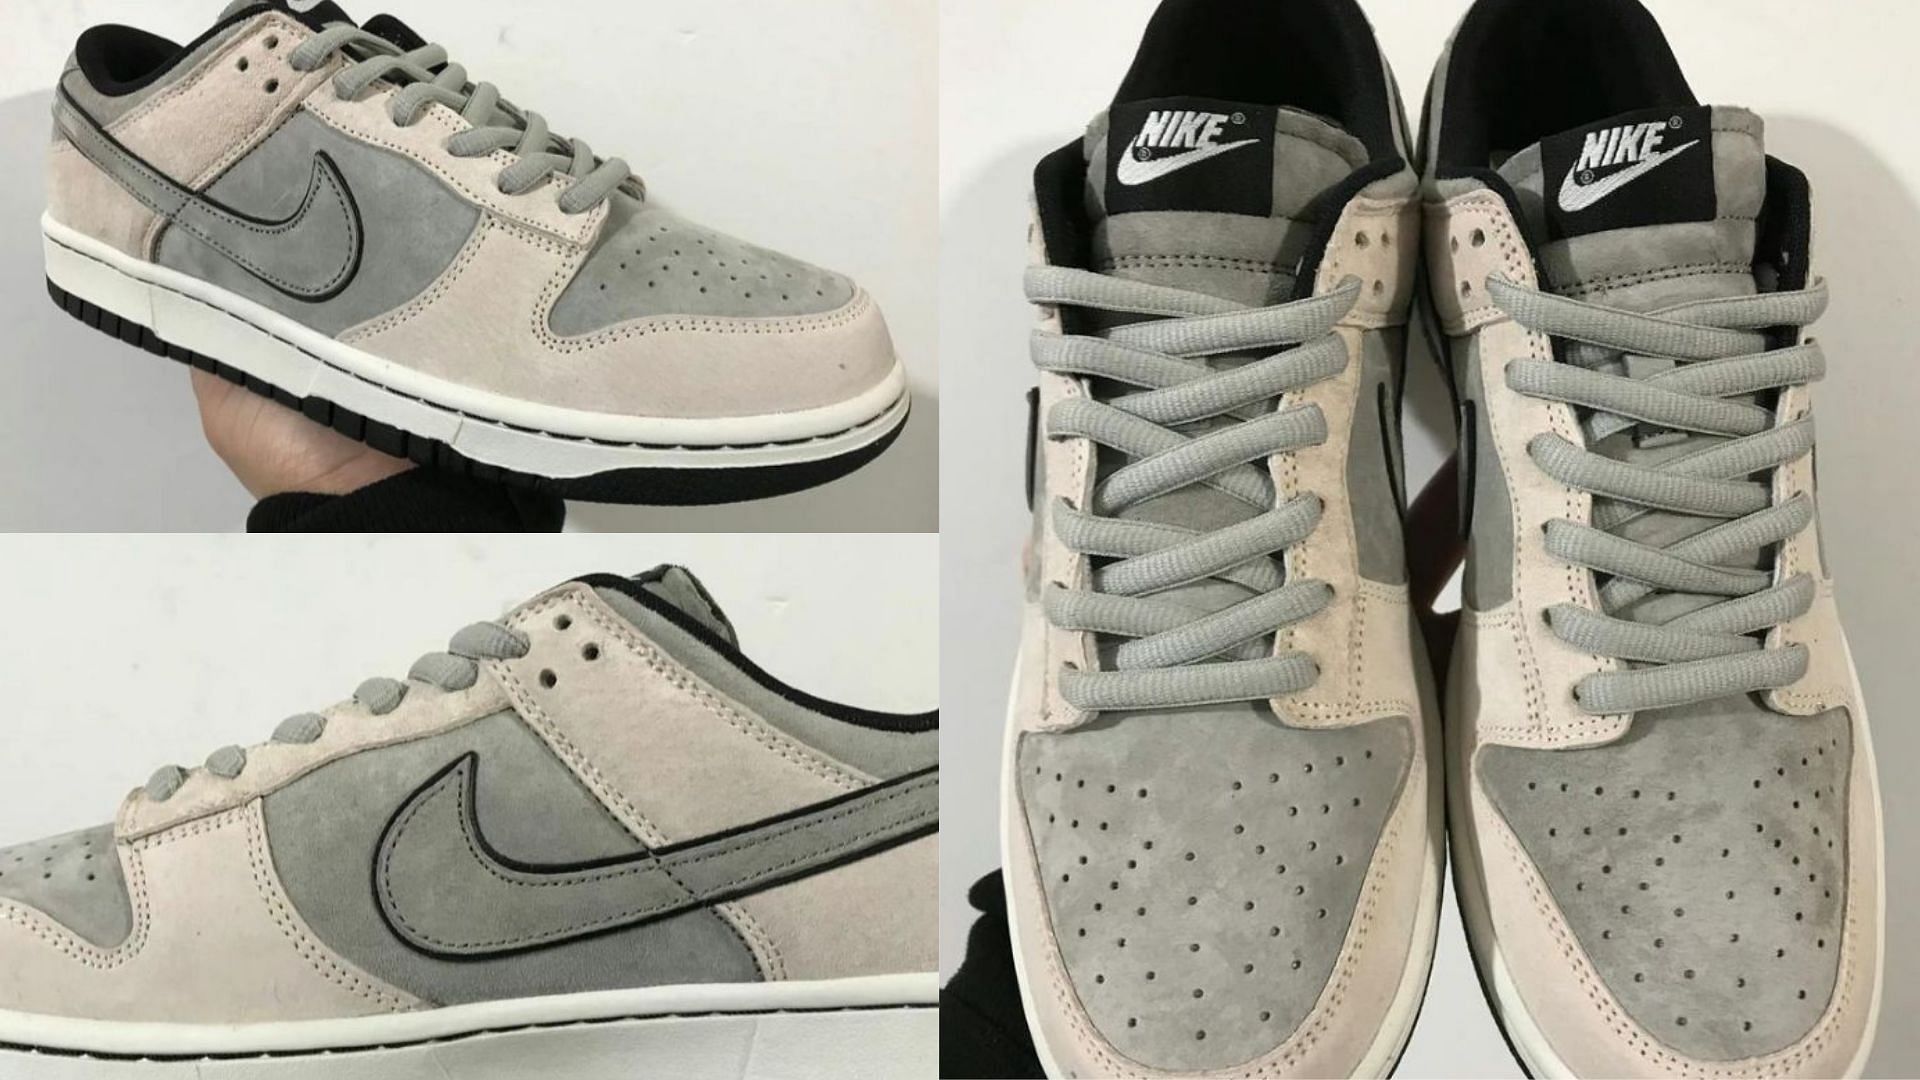 The first look of Nike Dunk Low sneakers in stone gray colorway (Image via Instagram/Chickenwop)